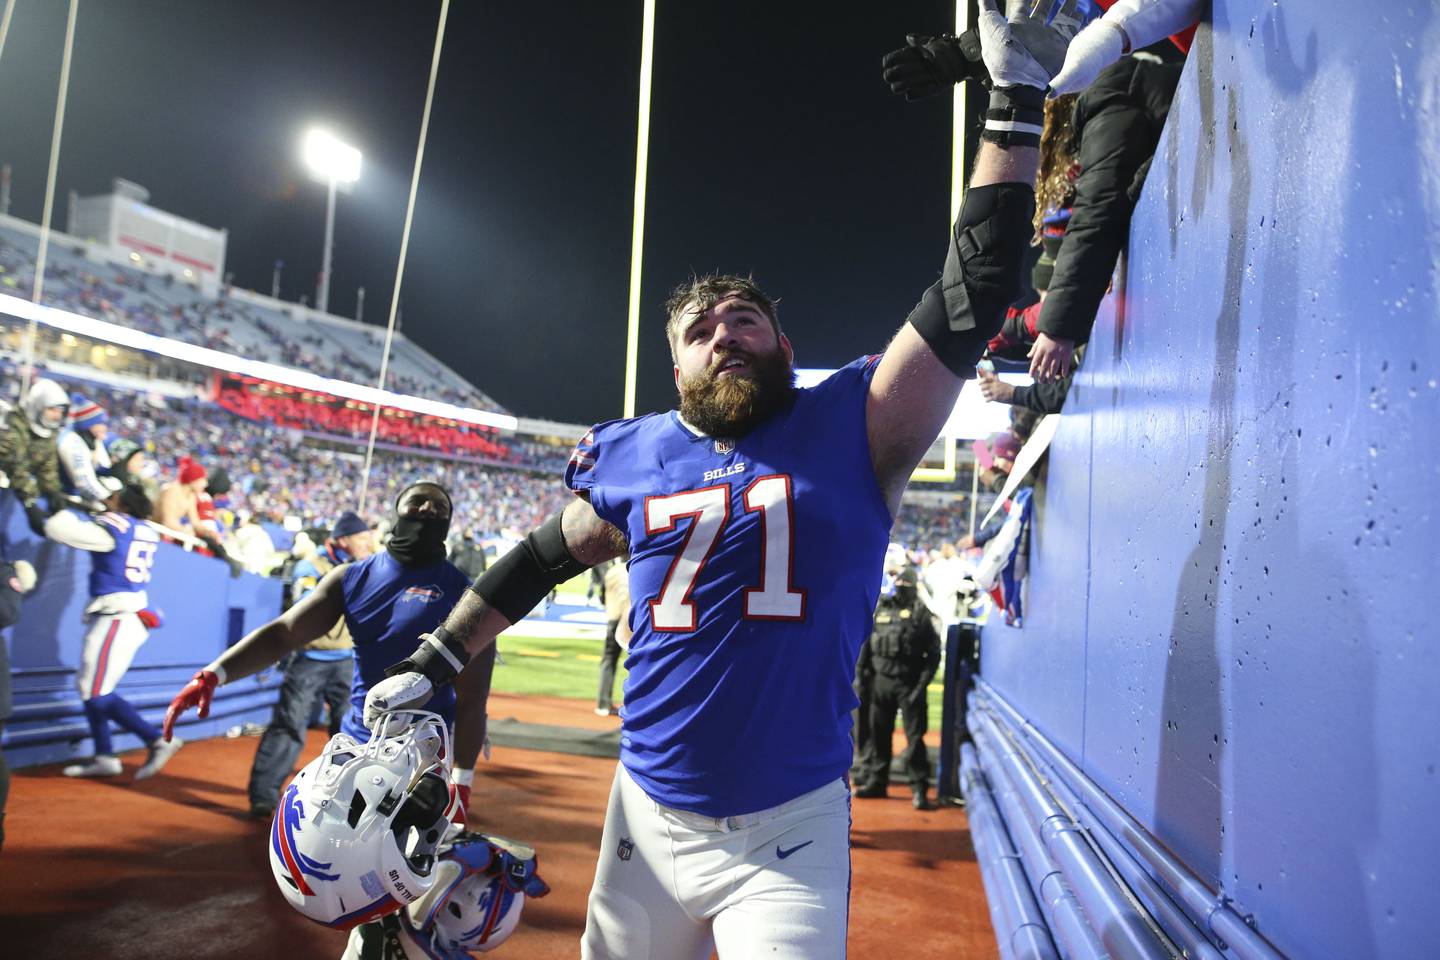 Buffalo Bills' Ryan Bates celebrates with fans after an NFL football game against the New York Jets, Sunday, Jan. 9, 2022, in Orchard Park, N.Y. The Bills defeated the Jets 27-10.